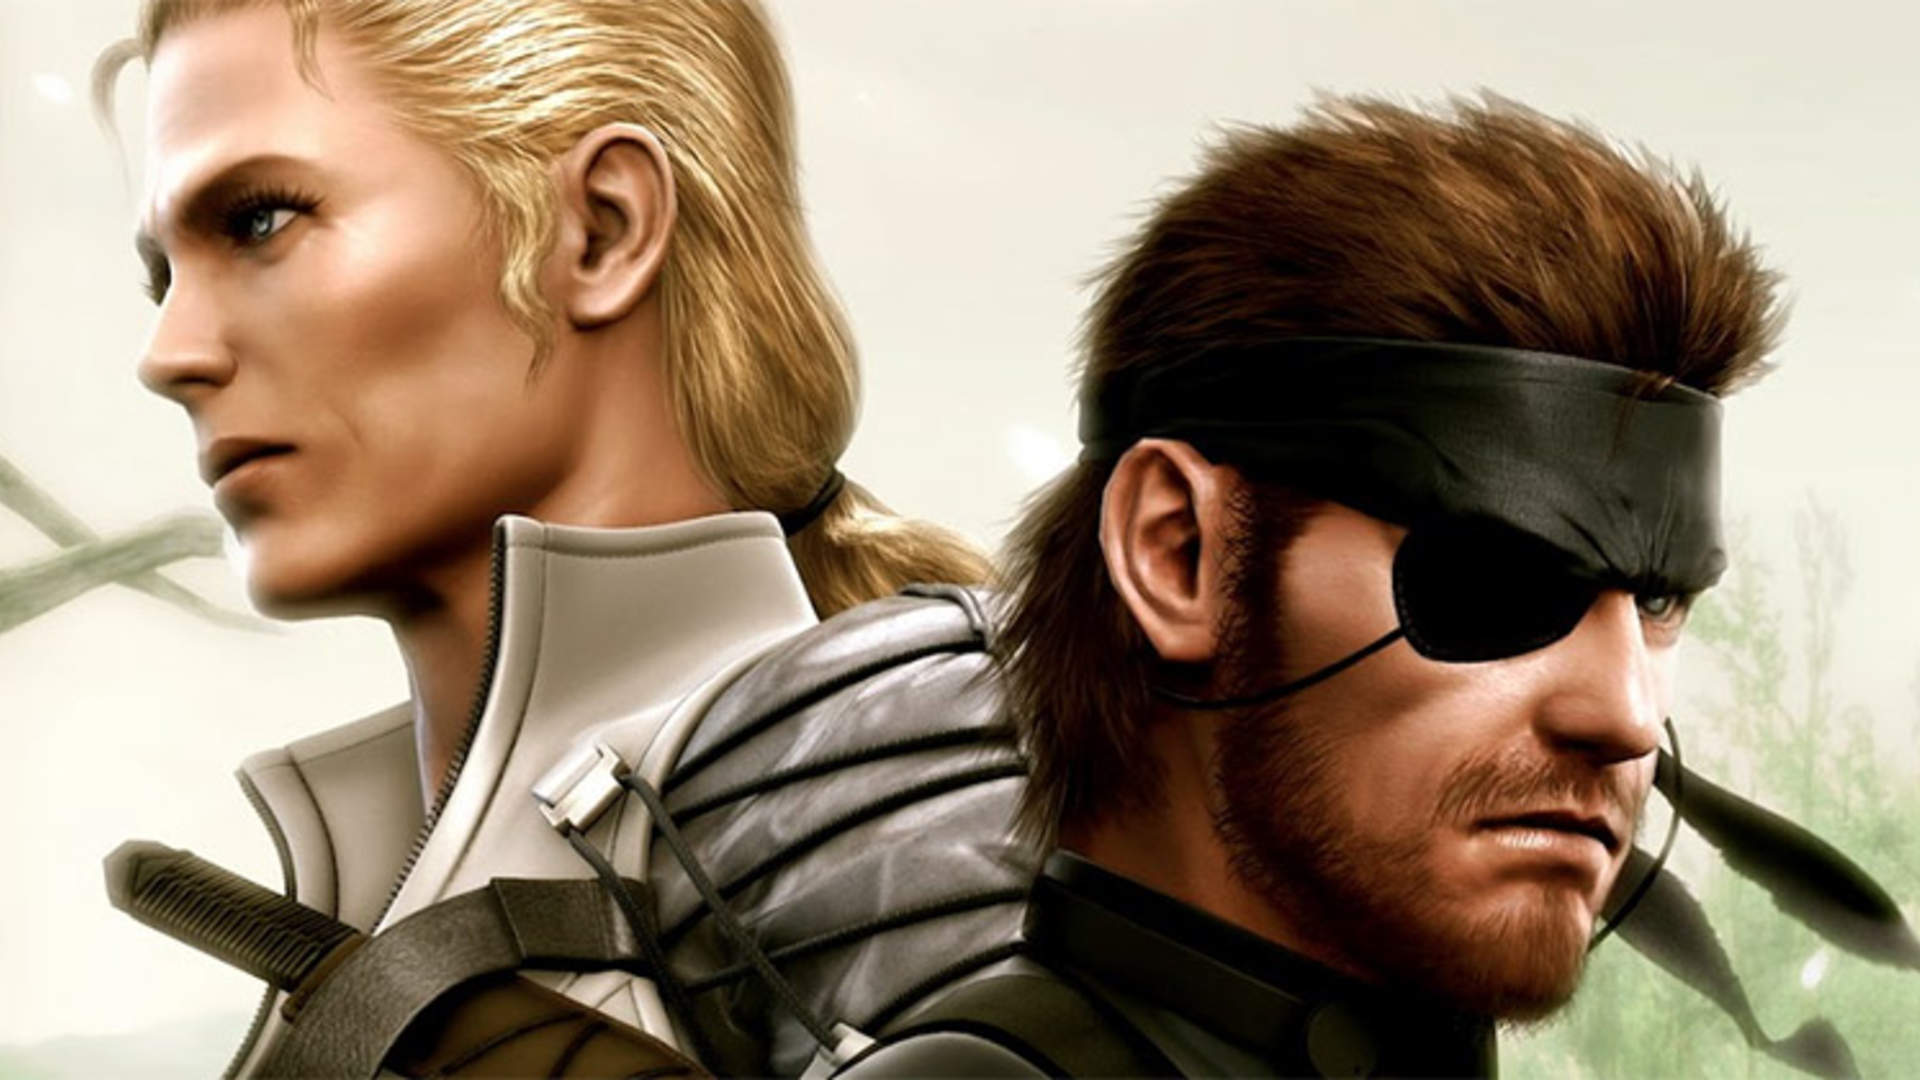 Metal Gear Solid® 3 Snake Eater™ - The Official Guide 